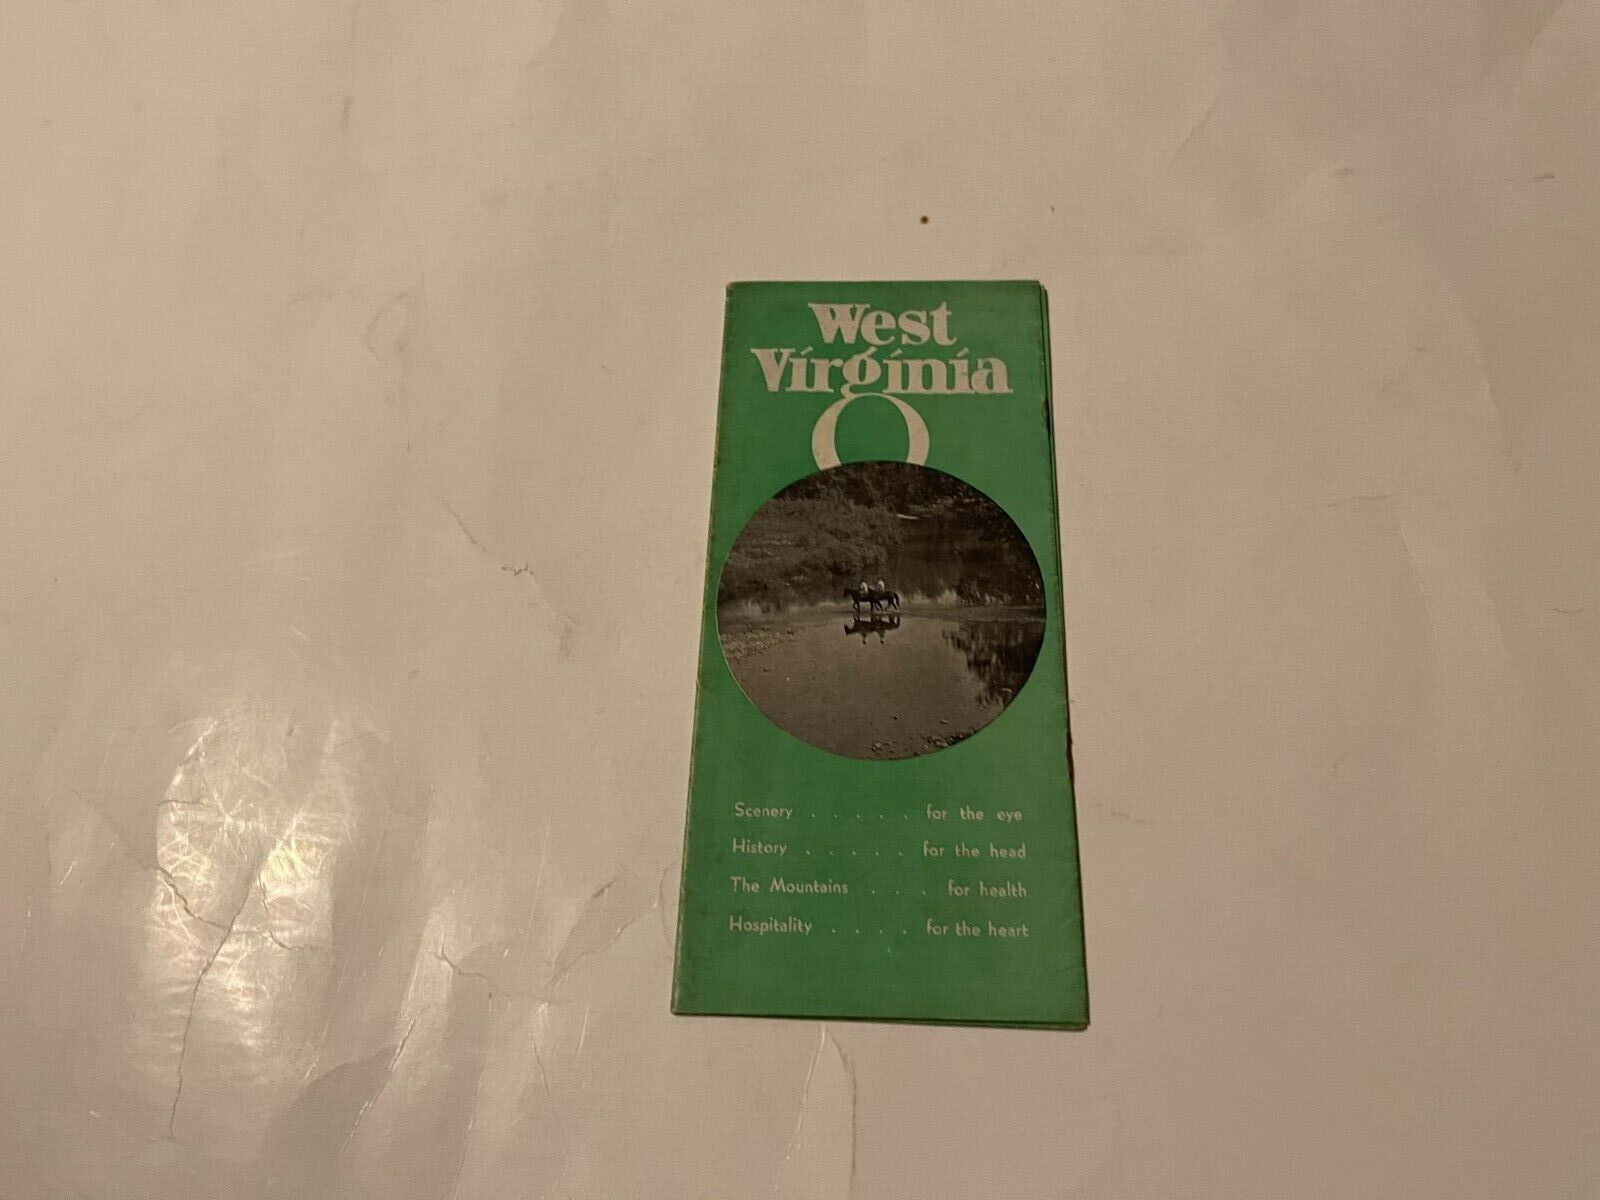 VINTAGE WEST VIRGINIA TRAVEL BROCHURE, UNDATED APPEARS TO BE 1940S-1950S